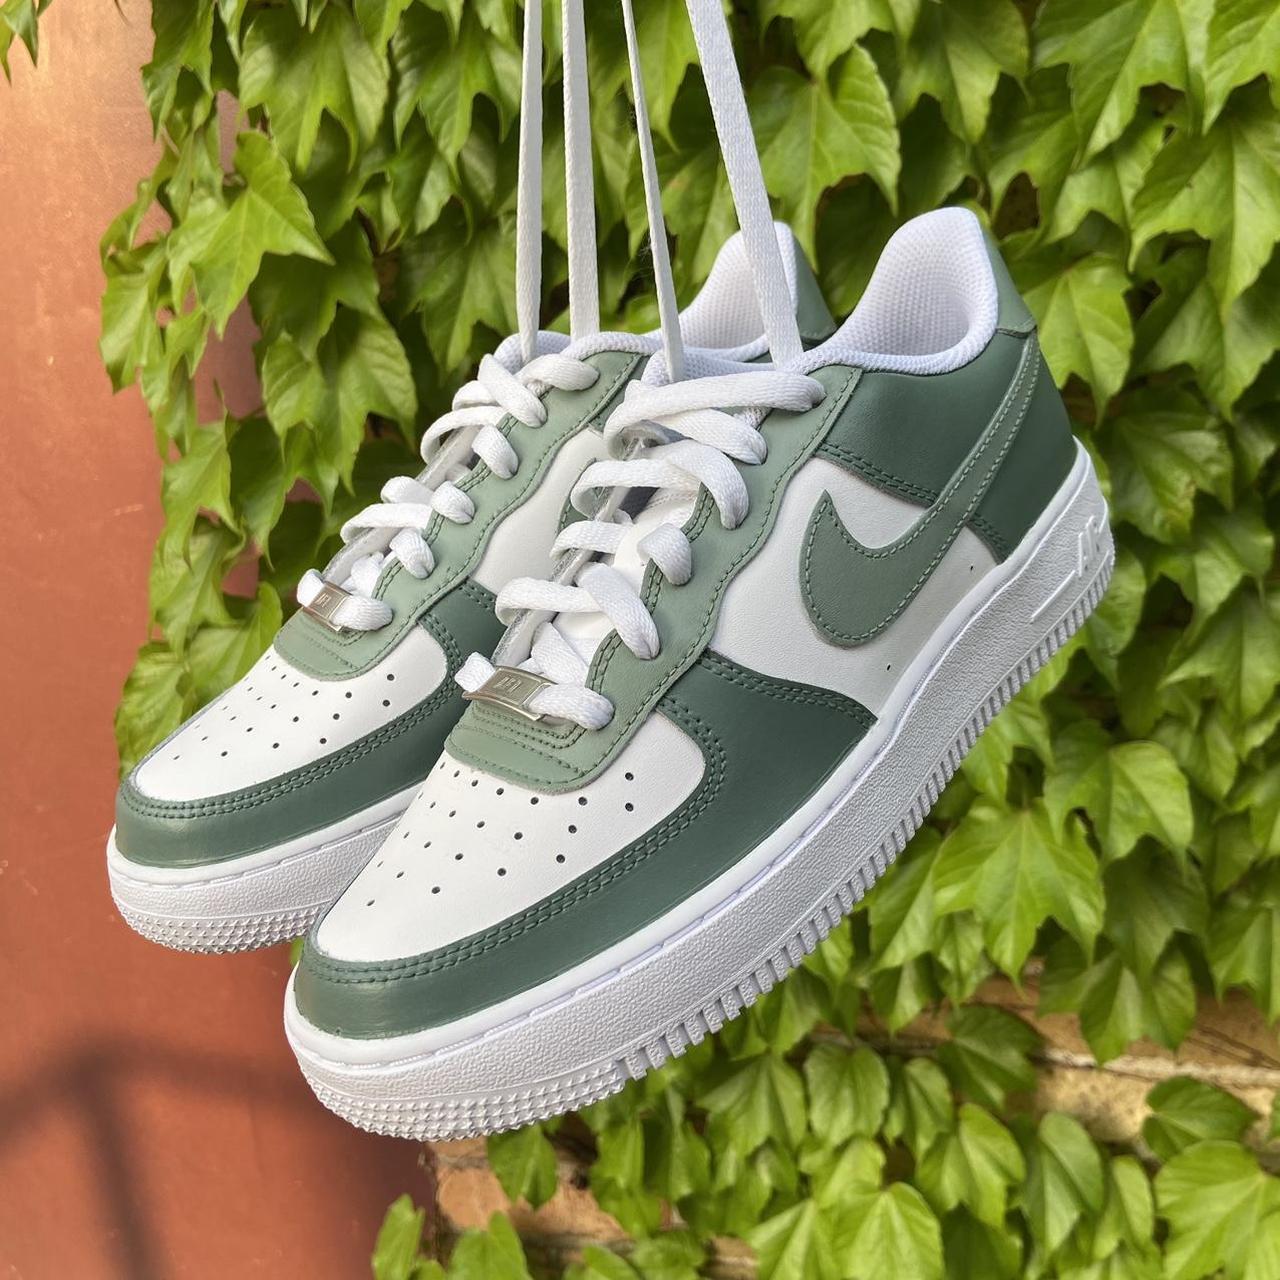 Custom Painted Air Force One